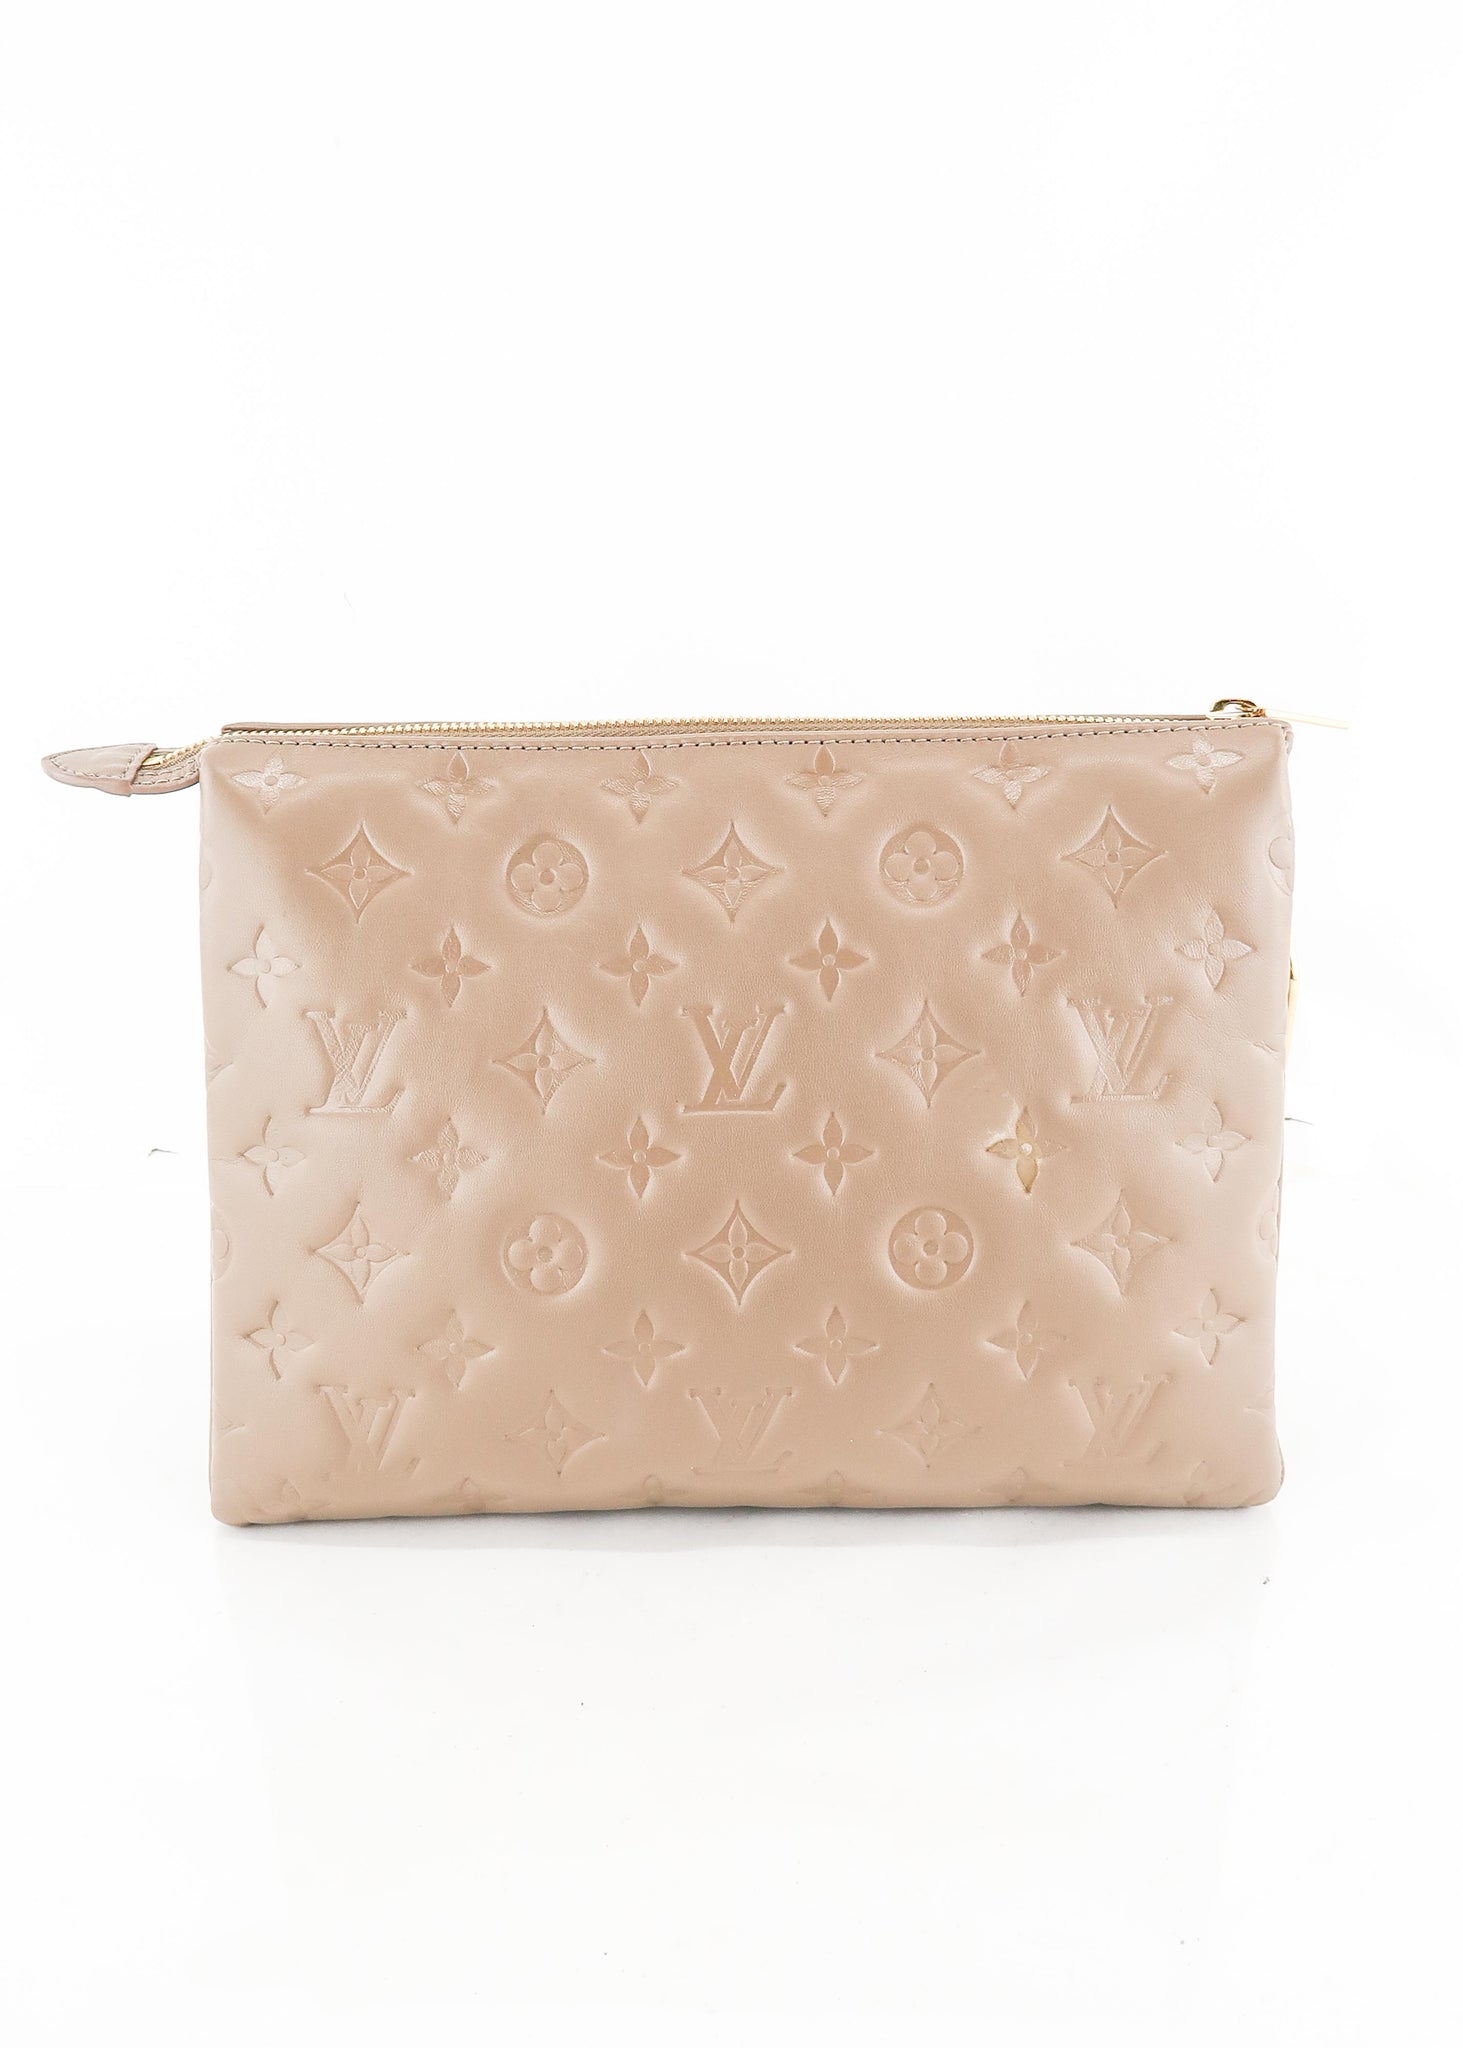 Louis Vuitton Taupe Monogram Embossed Lambskin Leather Coussin PM